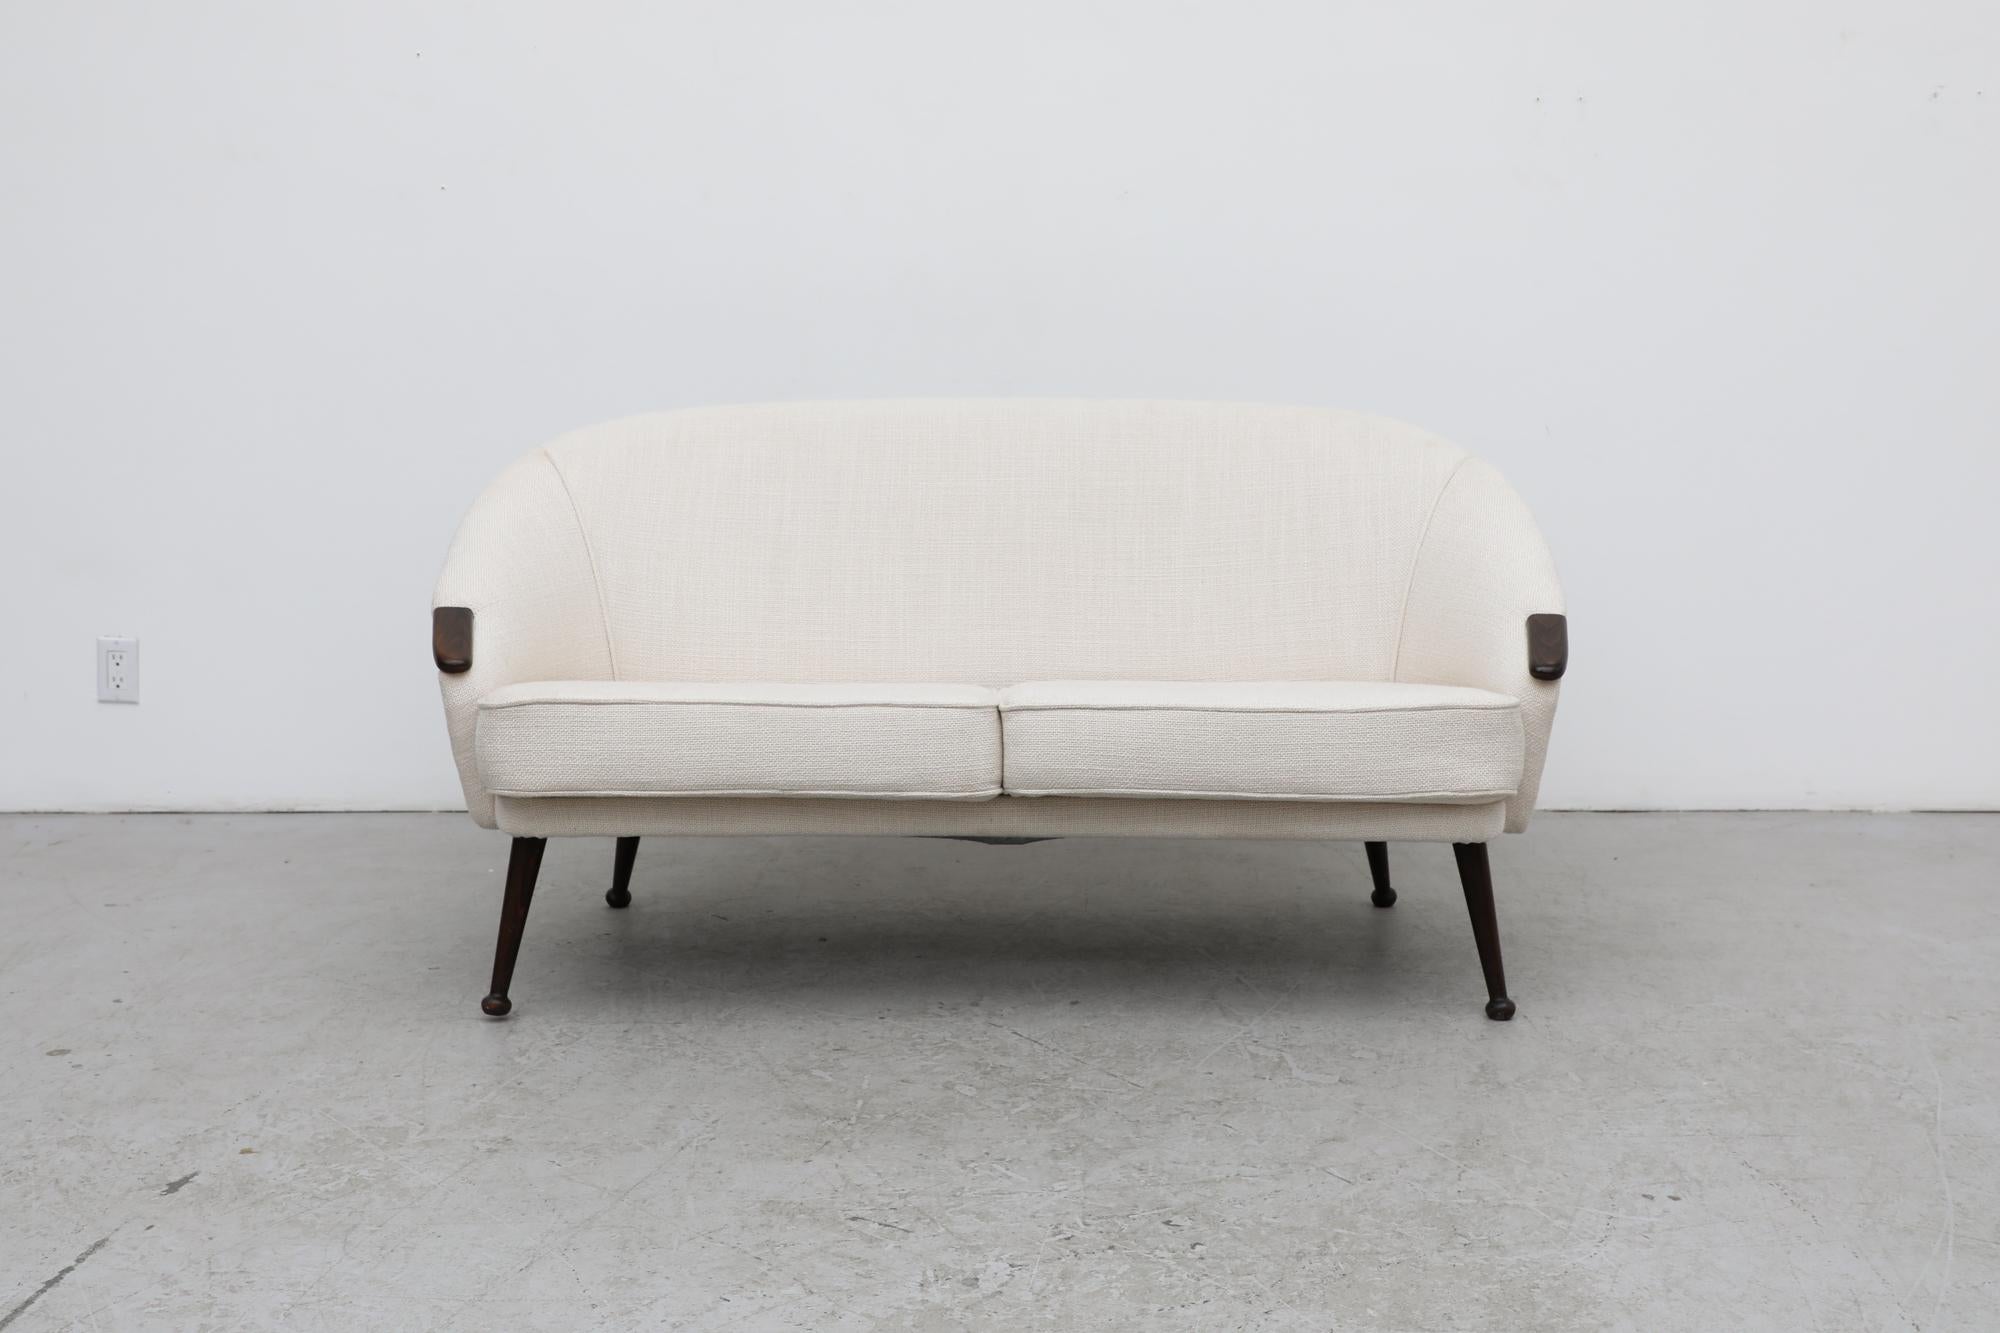 Swedish cream white loveseat sofa with tapered legs and wood details on the arms. Legs are tapered with a carved ball on the end. Slightly uneven, but sit flat when seated in the loveseat. The upholstery has beed recently re-done by previous owner,